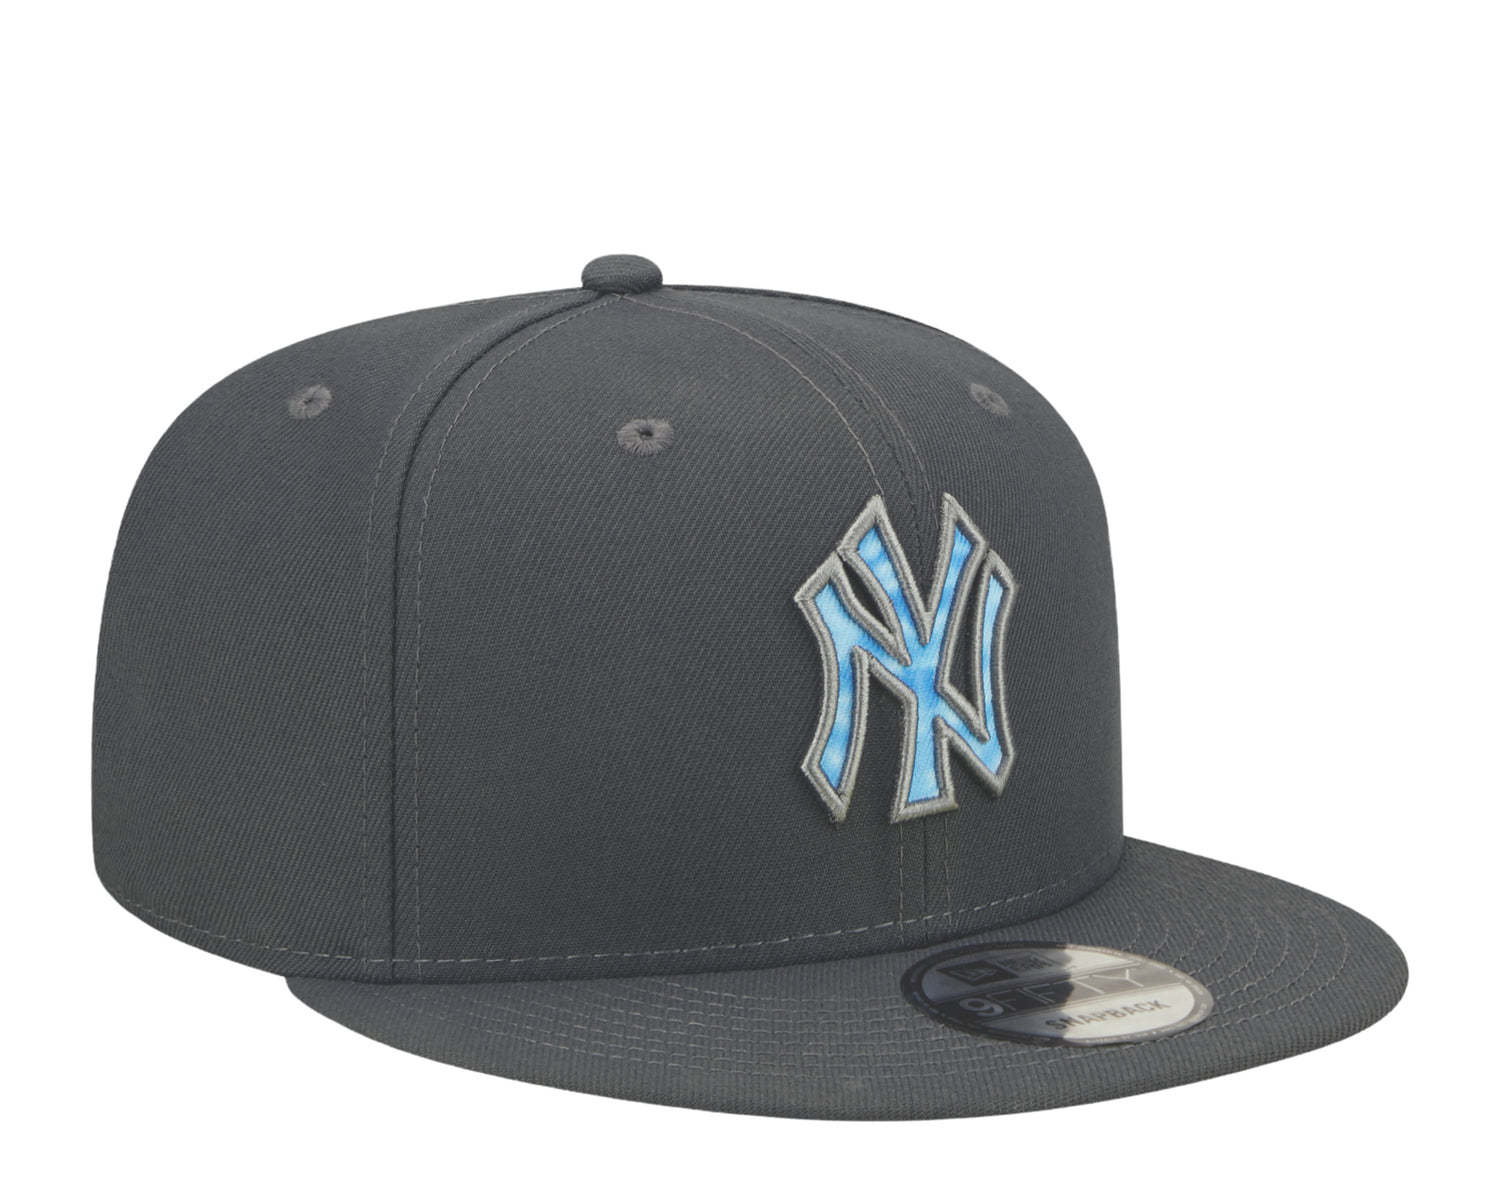 New Era 9Fifty MLB New York Yankees Father's Day Snapback Hat